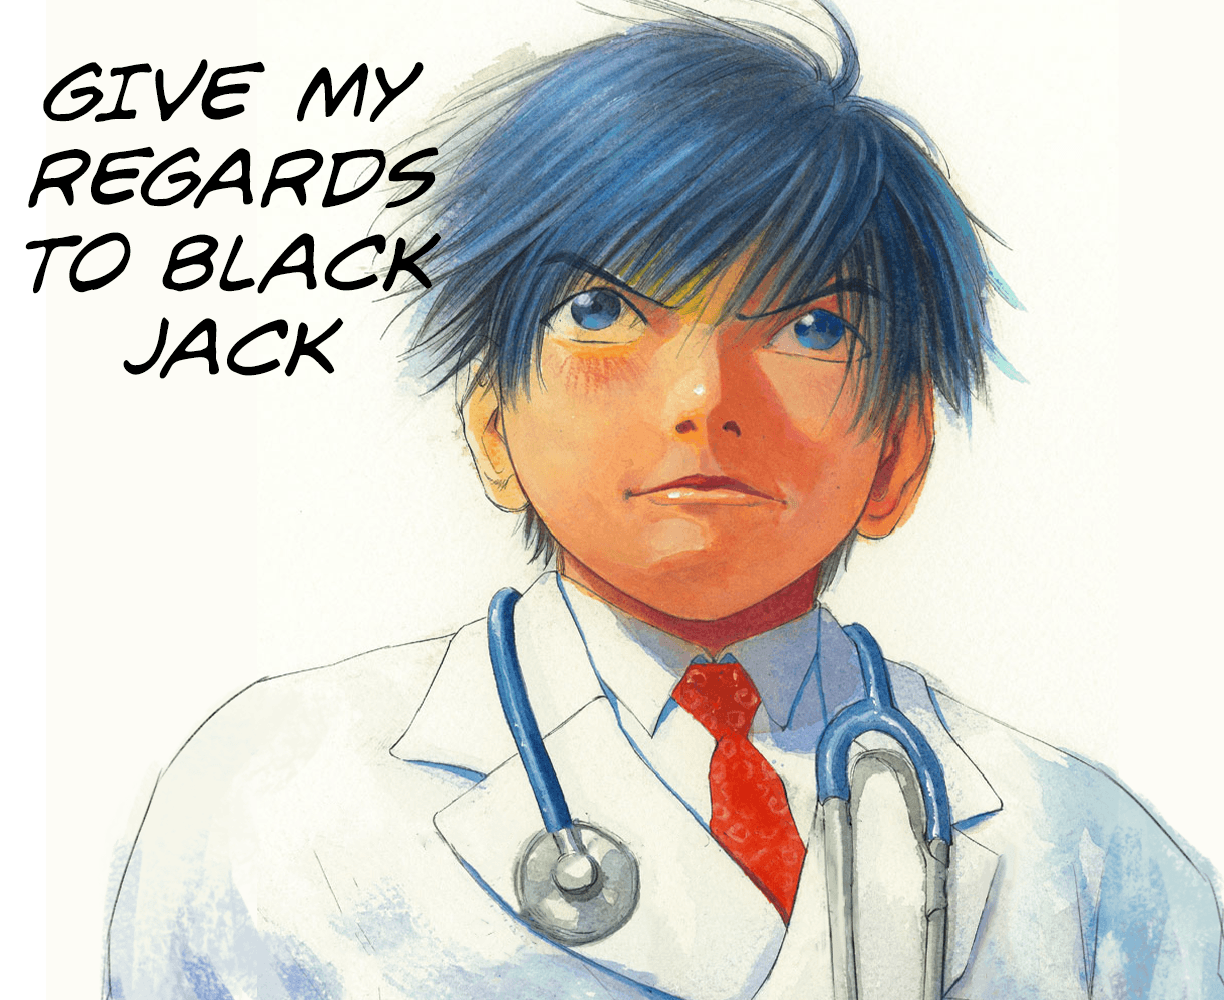 The cover art for the episode Even So from the comics series Give My Regards to Black Jack, which is number 54 in the series